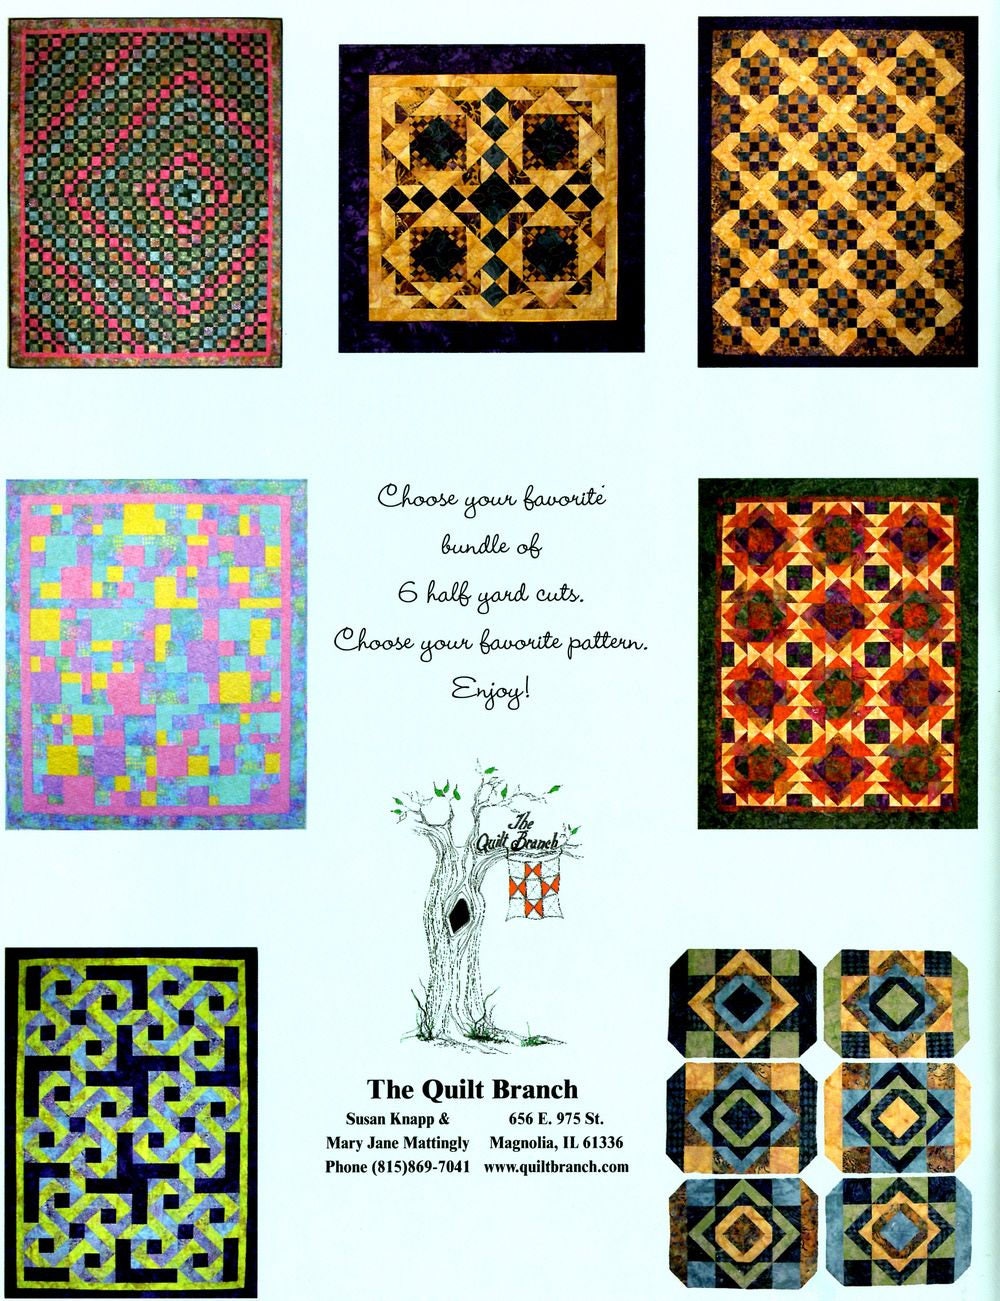 Six Halves Make A Whole Quilt Pattern Book by Susan Knapp of The Quilt Branch